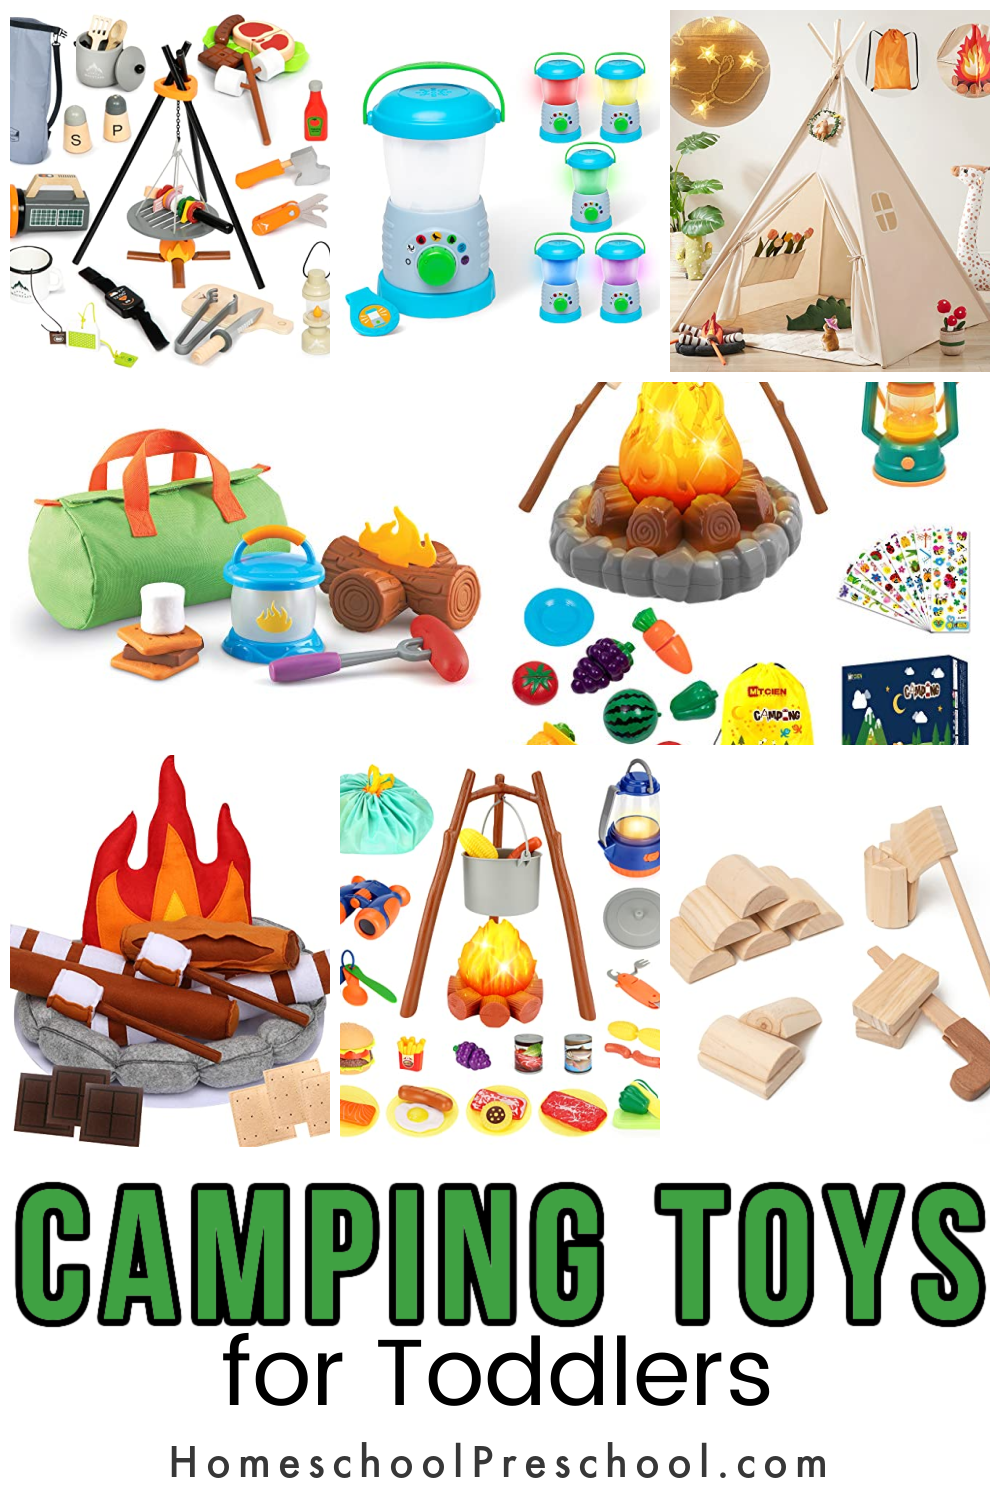 camping-toys-2 Camping Toys for Toddlers